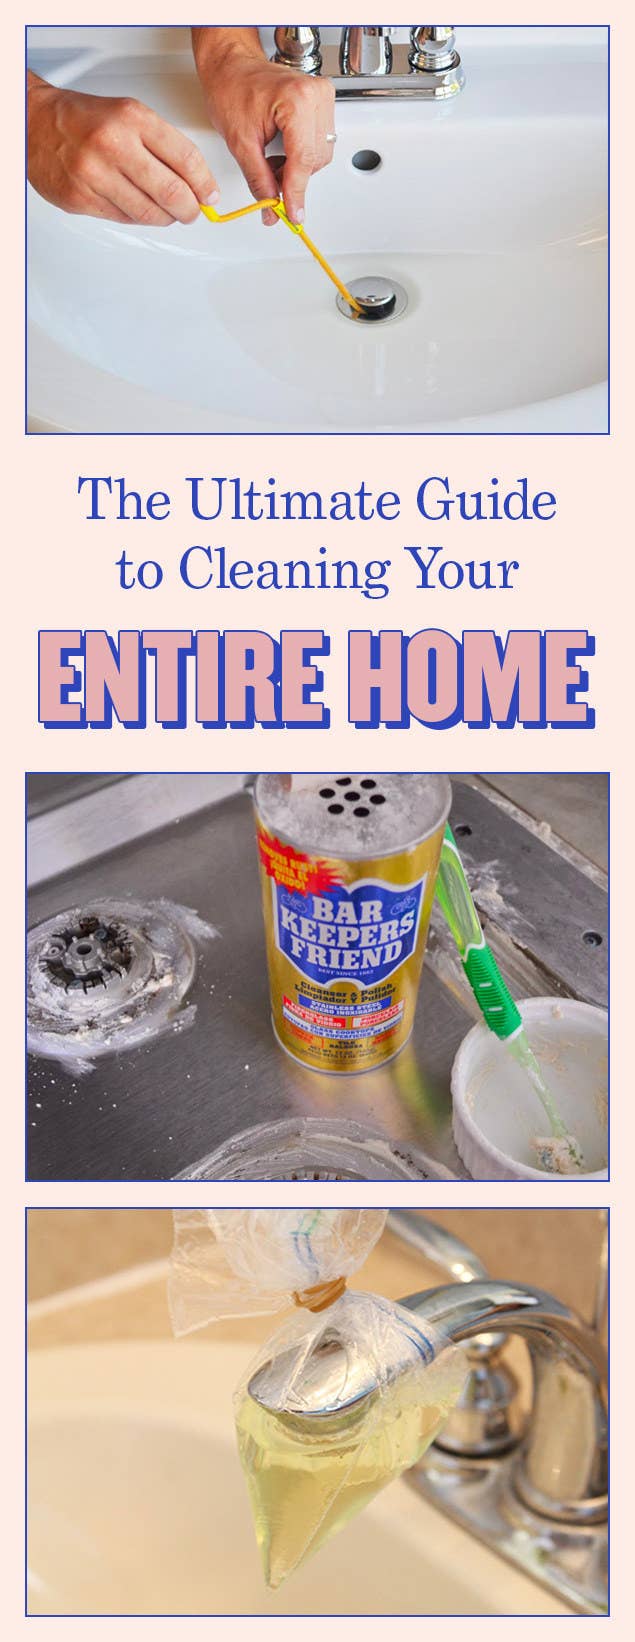 34 Cleaning Tips That'll Make Chores Less Terrible